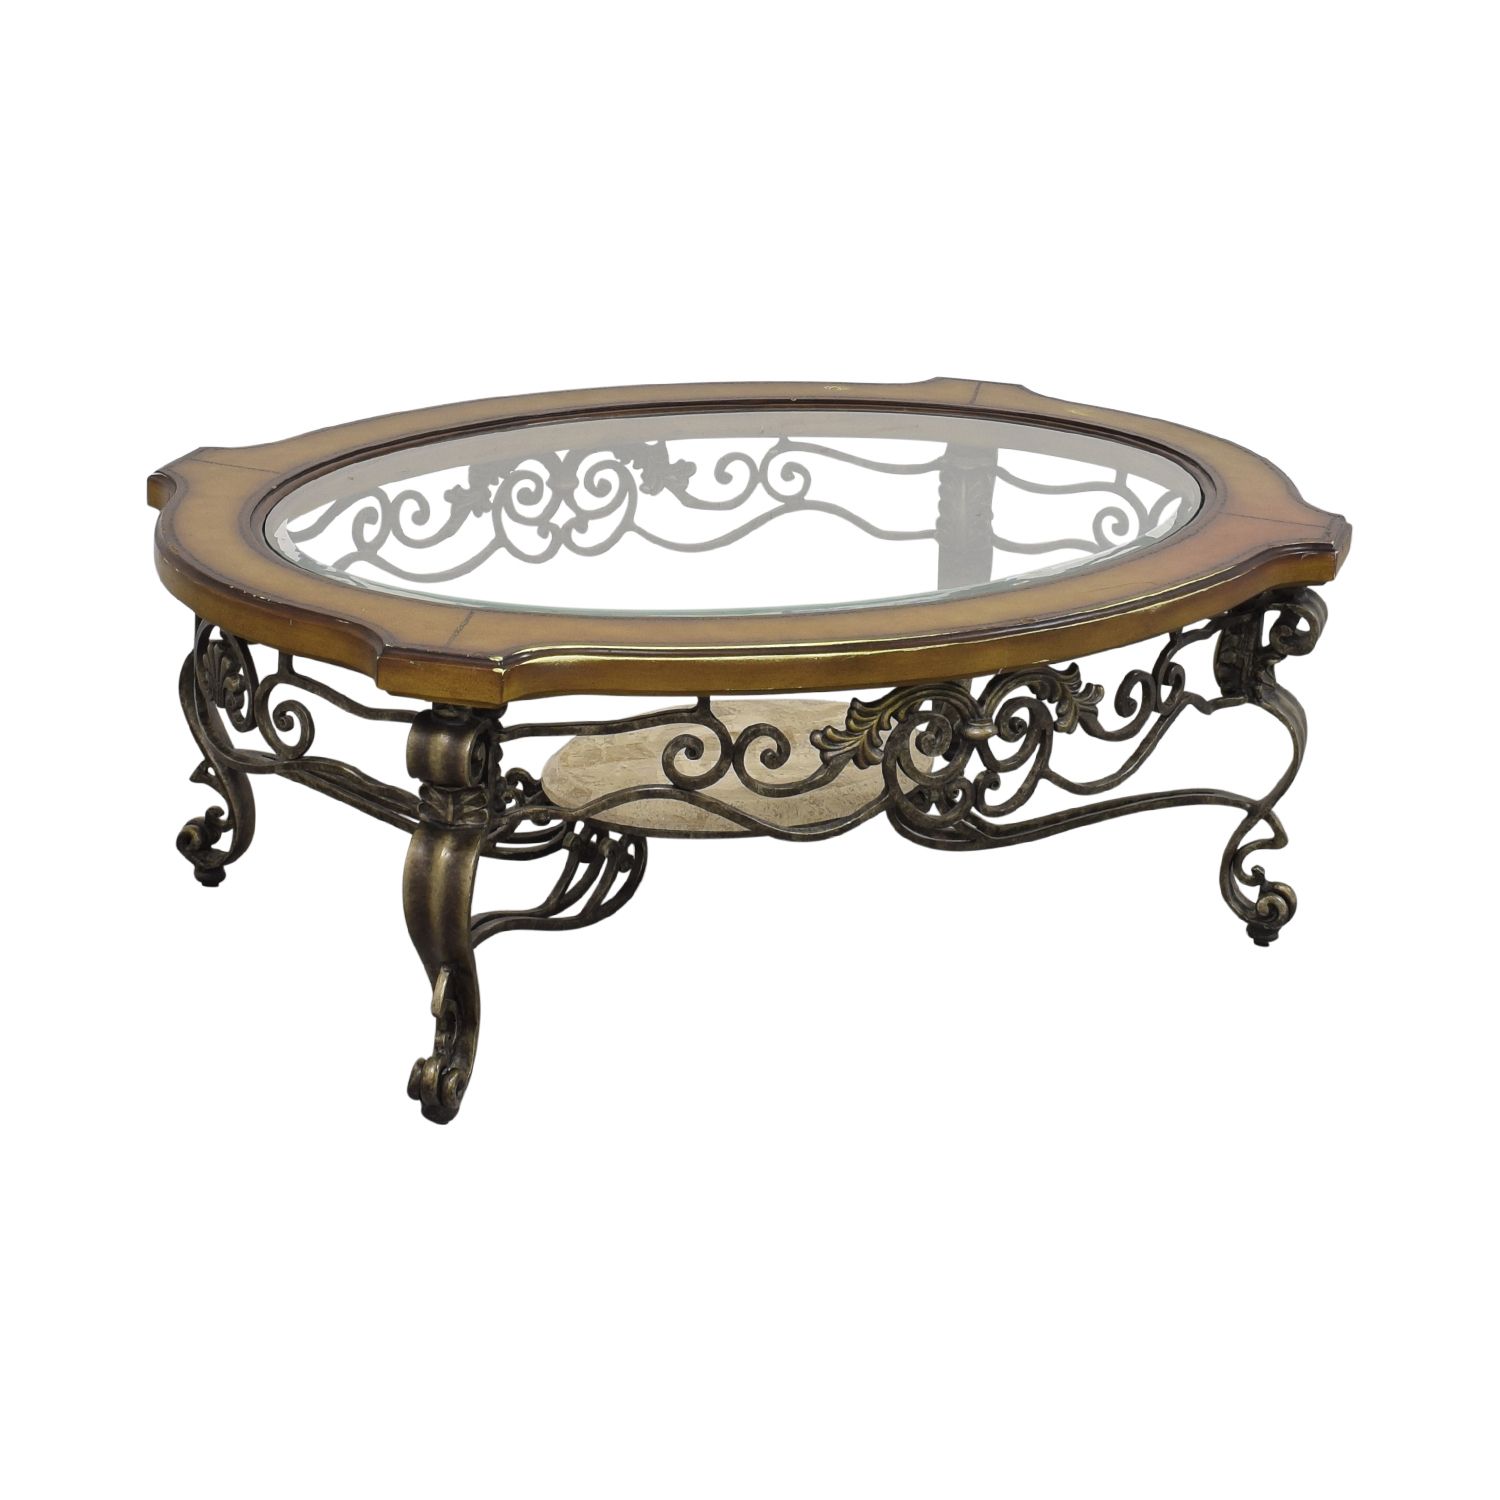 Thomasville Coffee Table : Thomasville Coffee & End Table With Popular 2 Drawer Oval Coffee Tables (View 10 of 20)